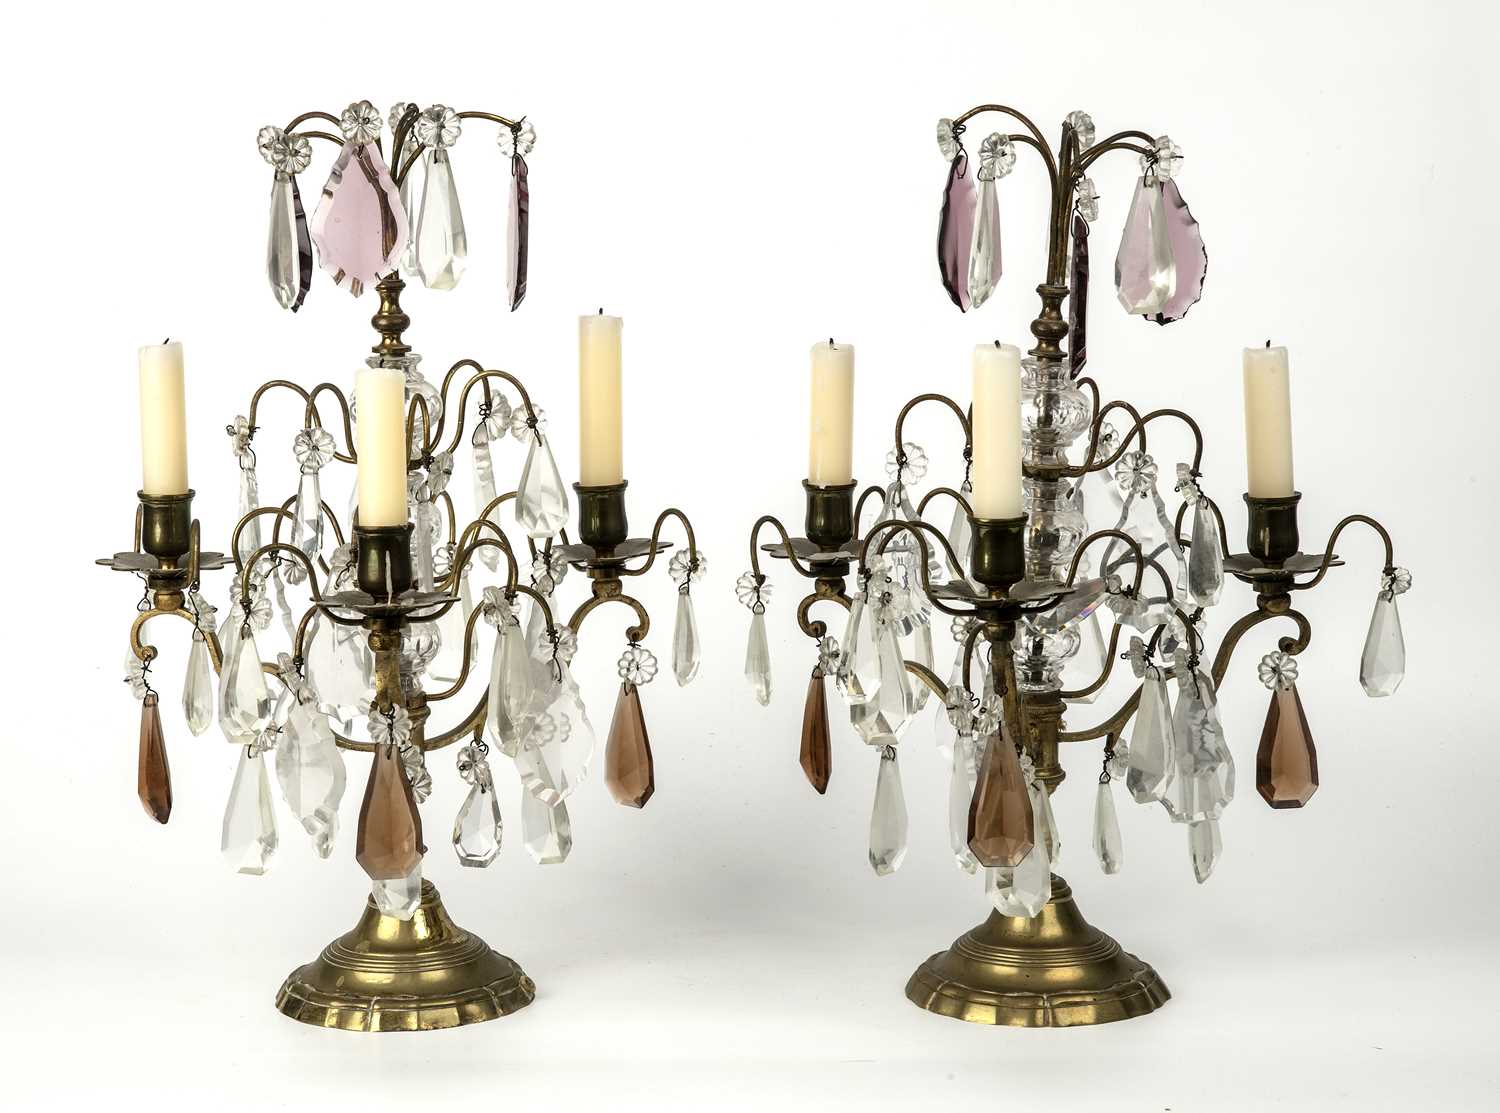 A pair of late 19th century French gilt metal three branch candelabra with cut glass drops, 29cm